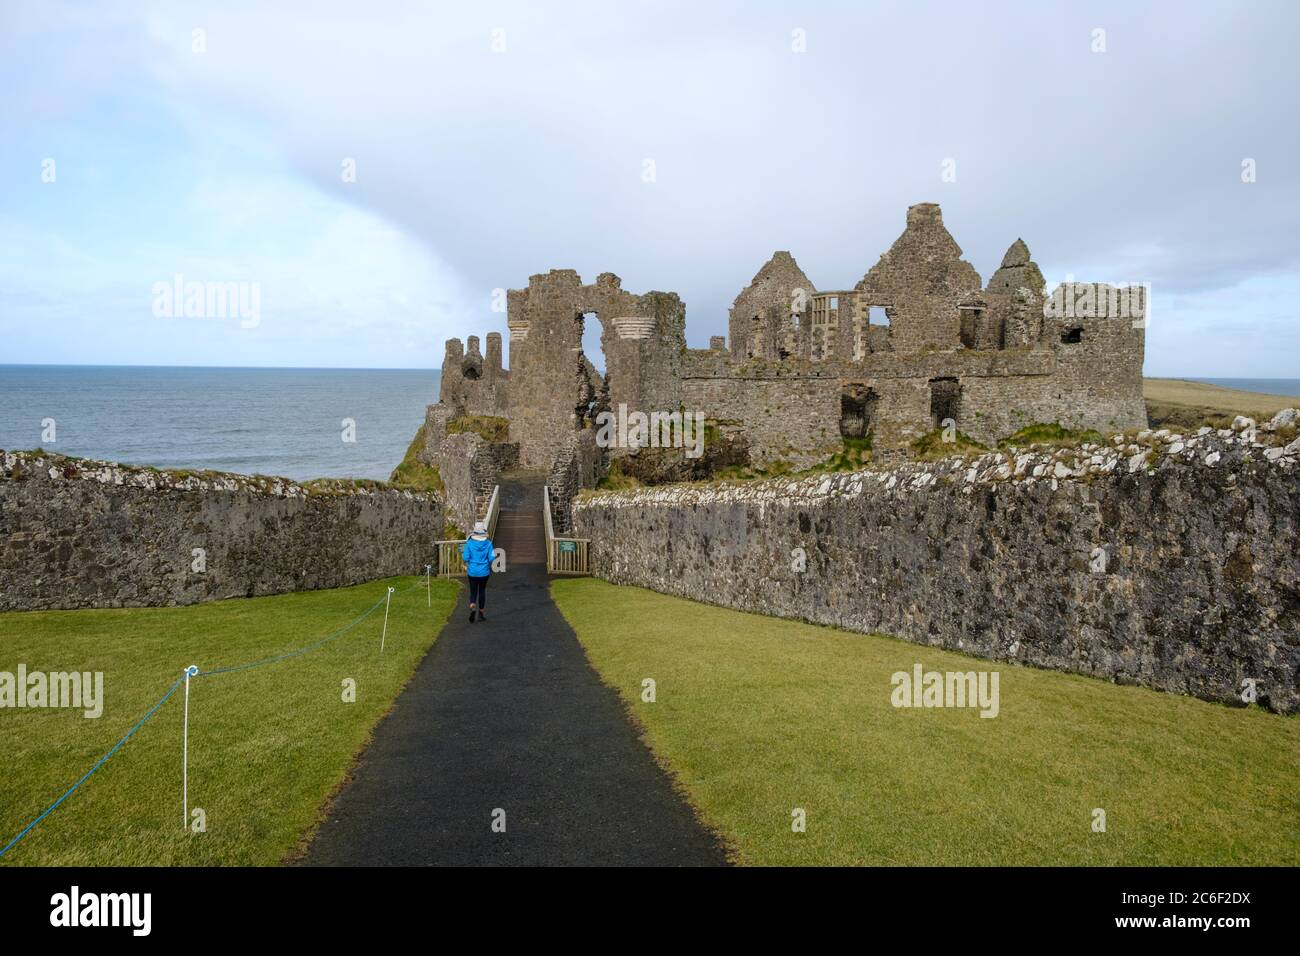 Lady in light blue coat walks down the entrance path towards the spectacular ruins of Dunluce Castle near Portrush, Co. Antrim, Northern Ireland Stock Photo